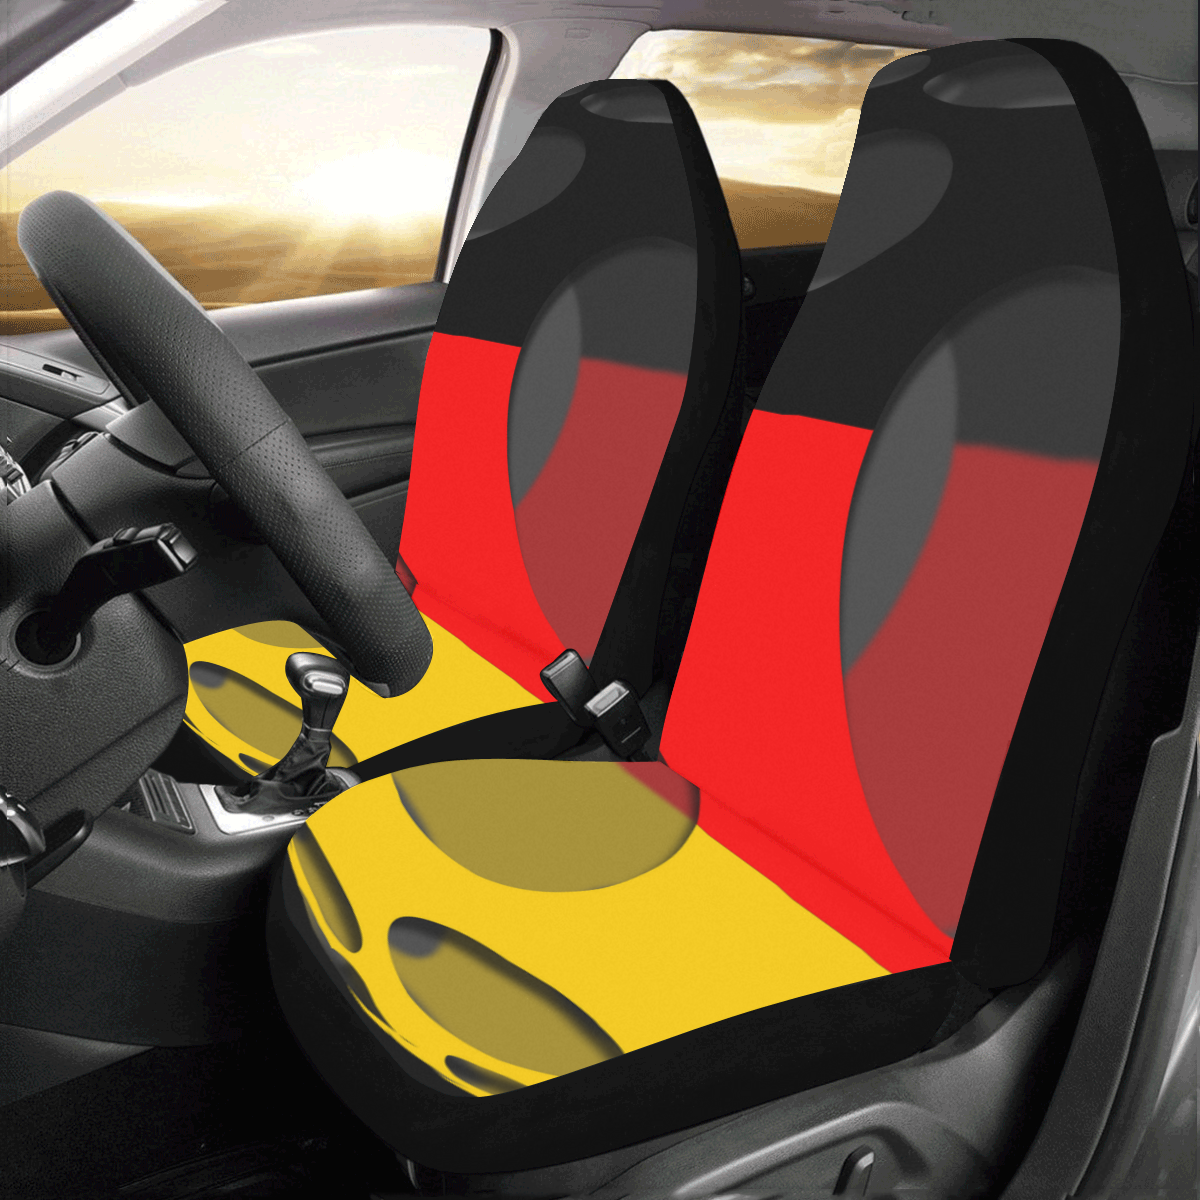 The Flag of Germany Car Seat Covers (Set of 2)